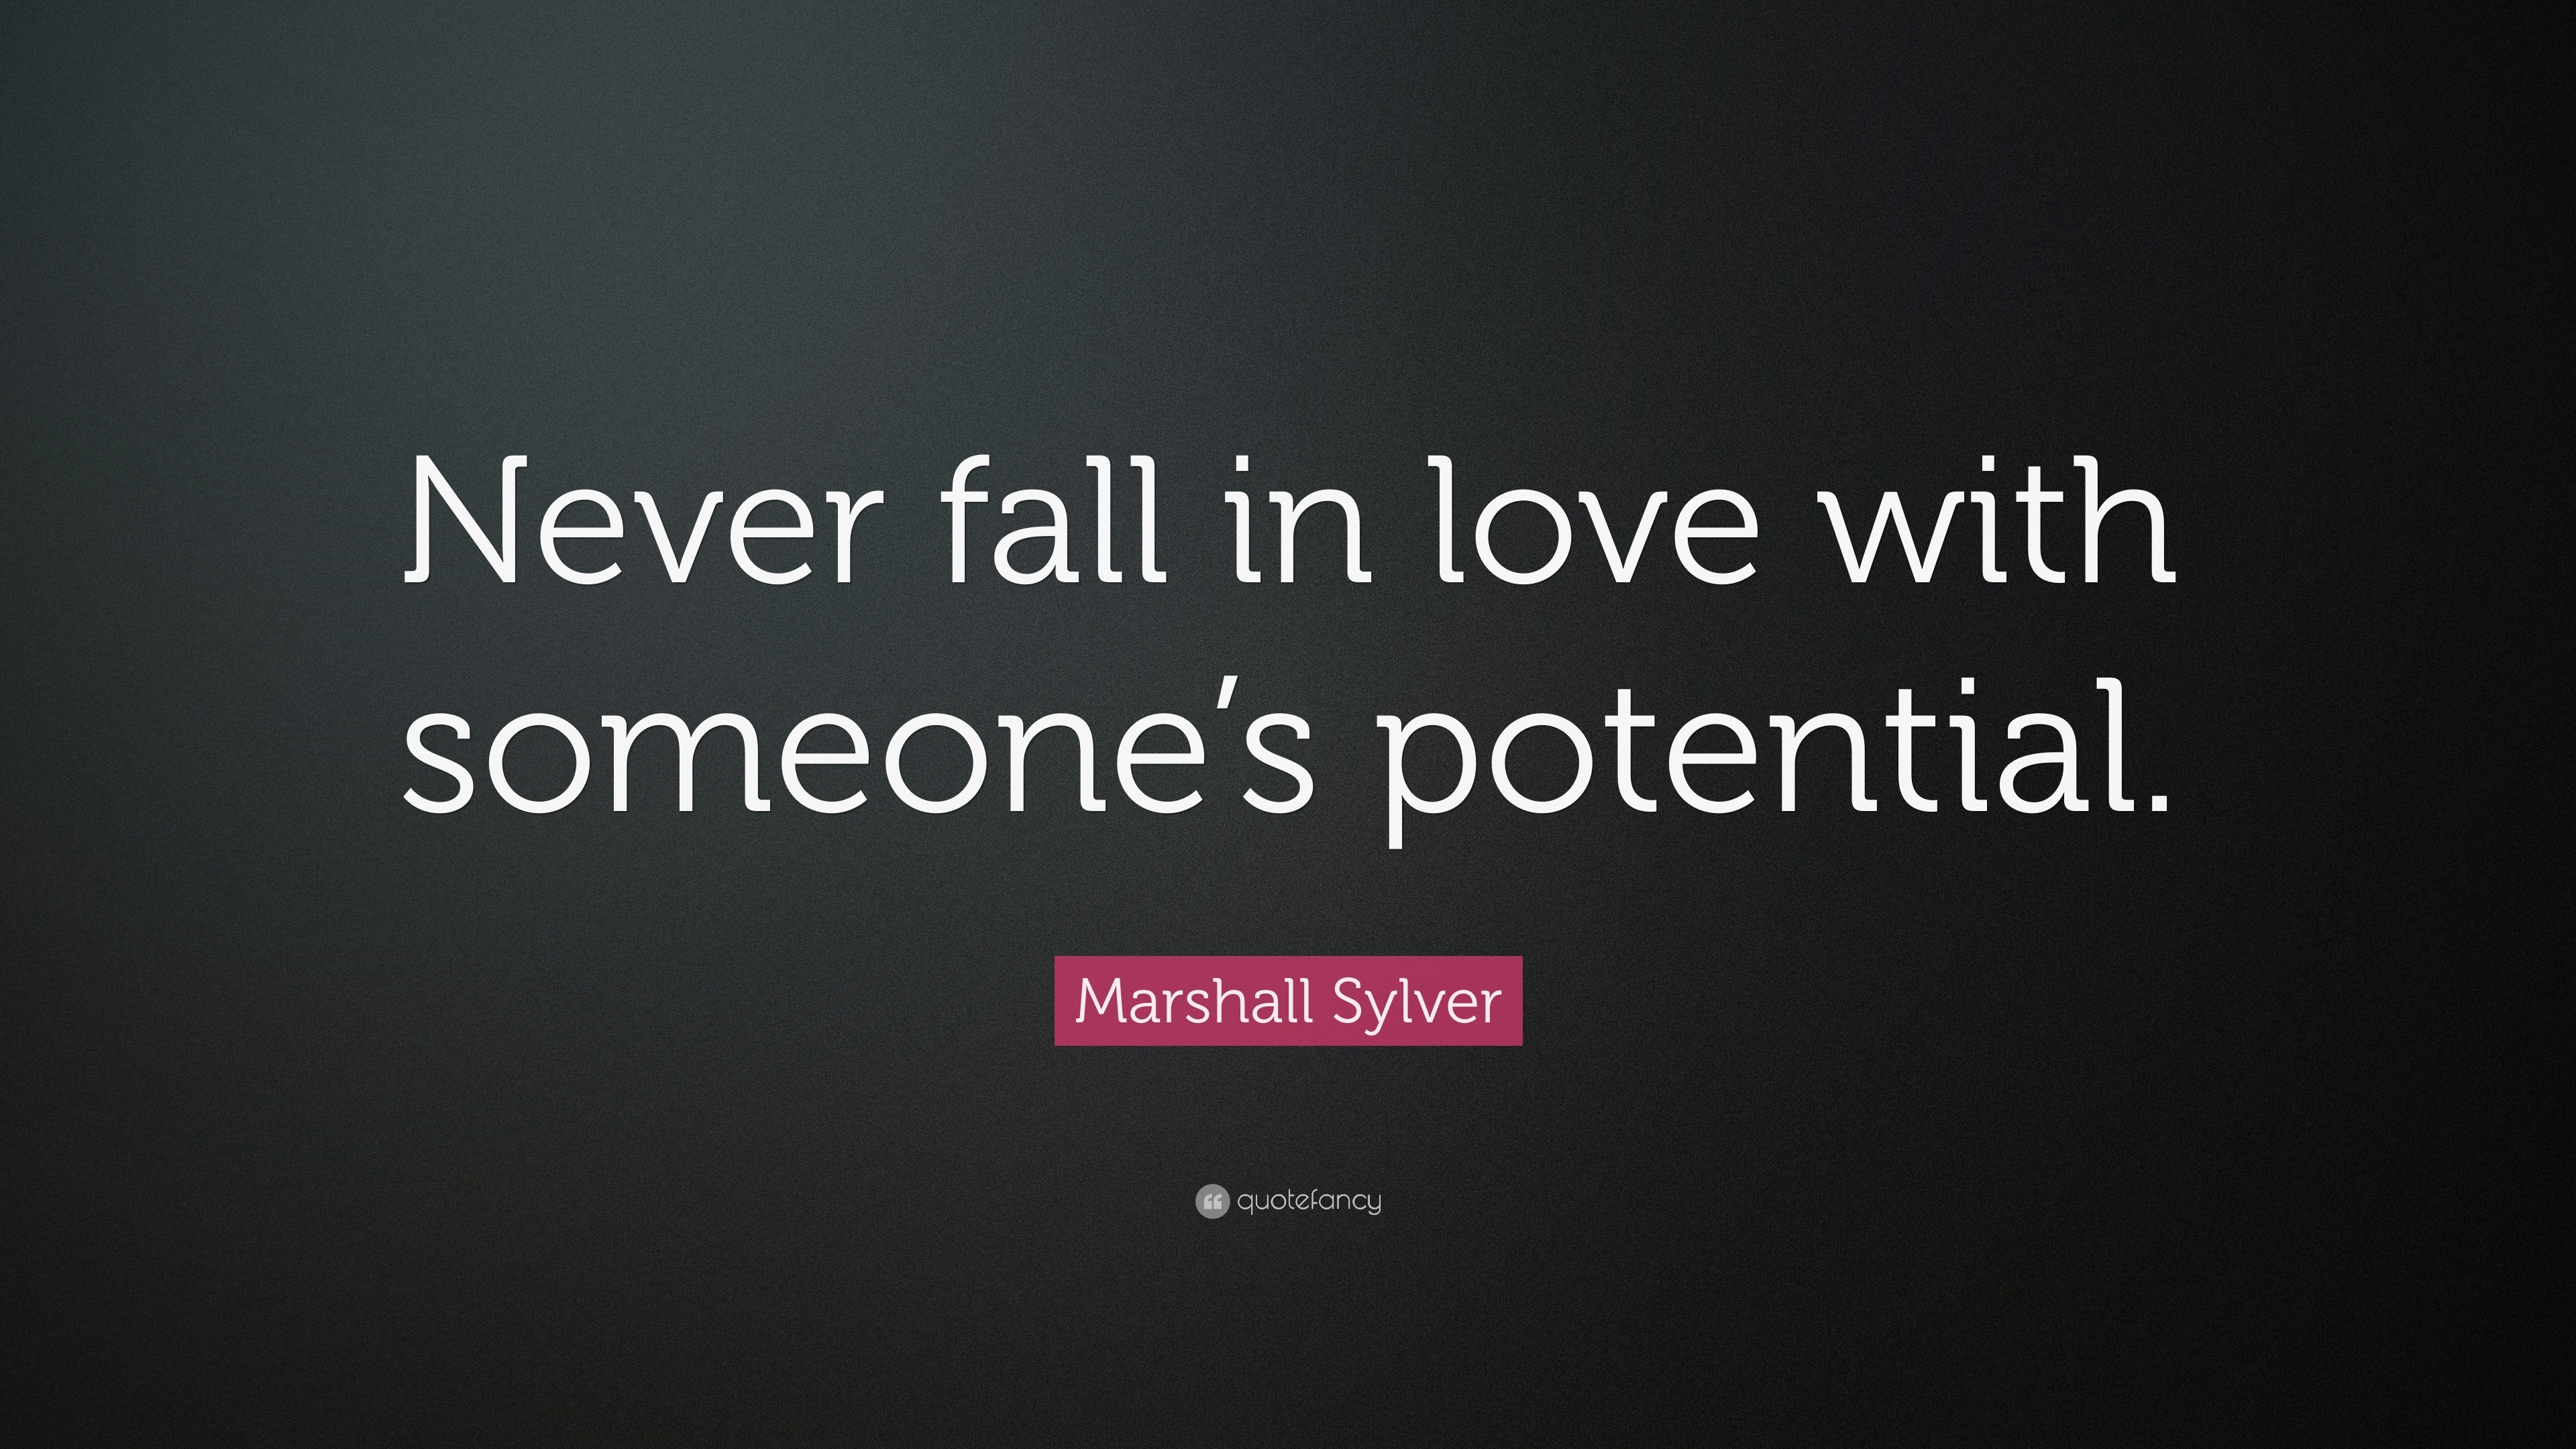 never fall in love quotes Famous never fall in love quotes Popular never fall in love quotes